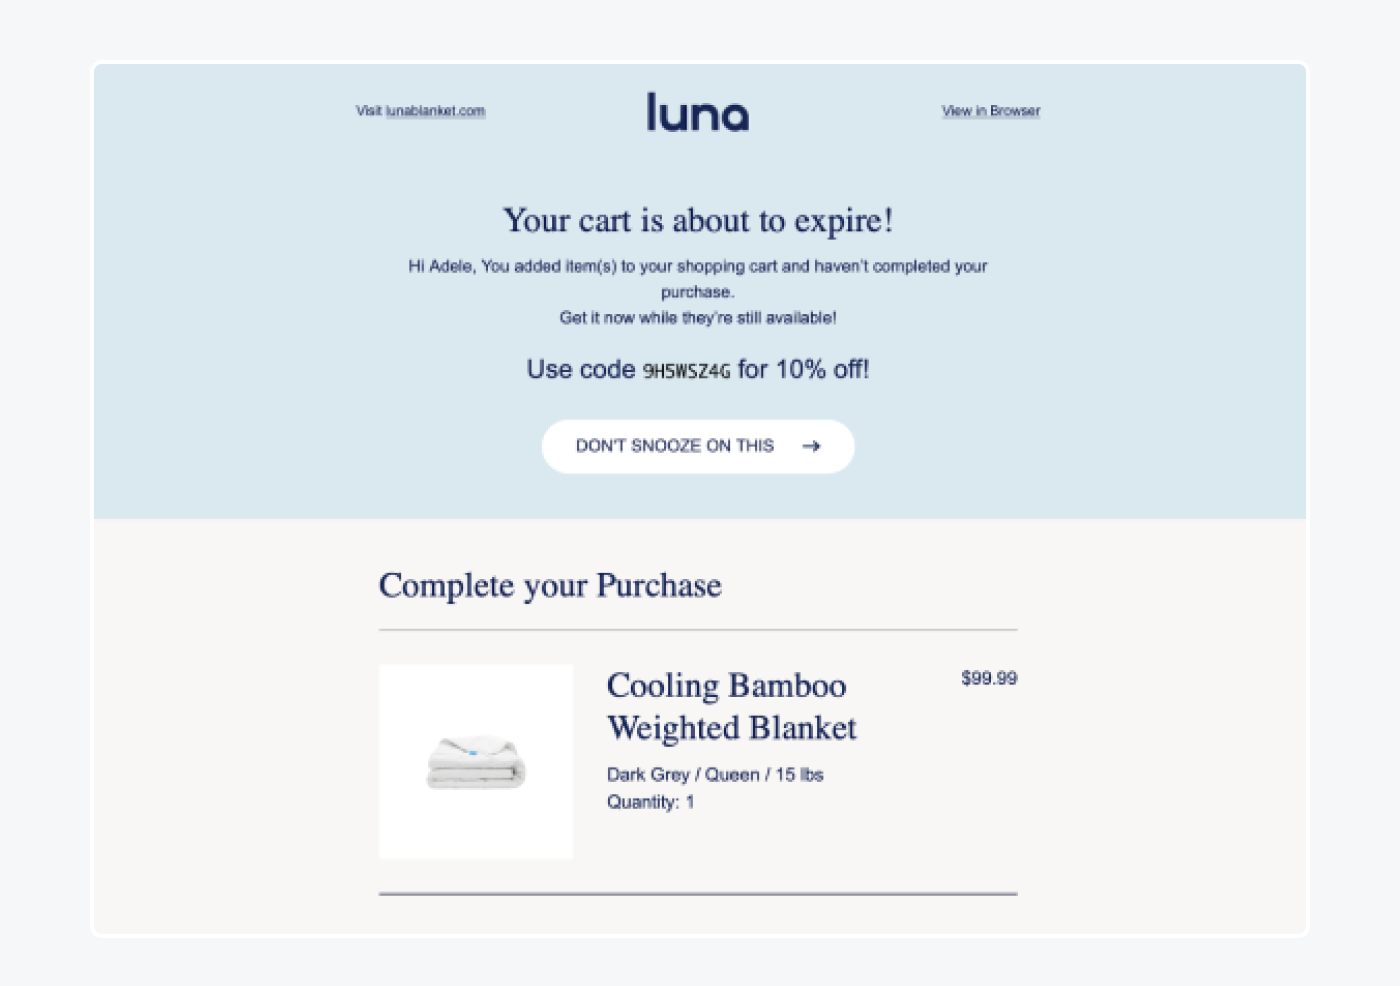 luna's abandoned cart email examples